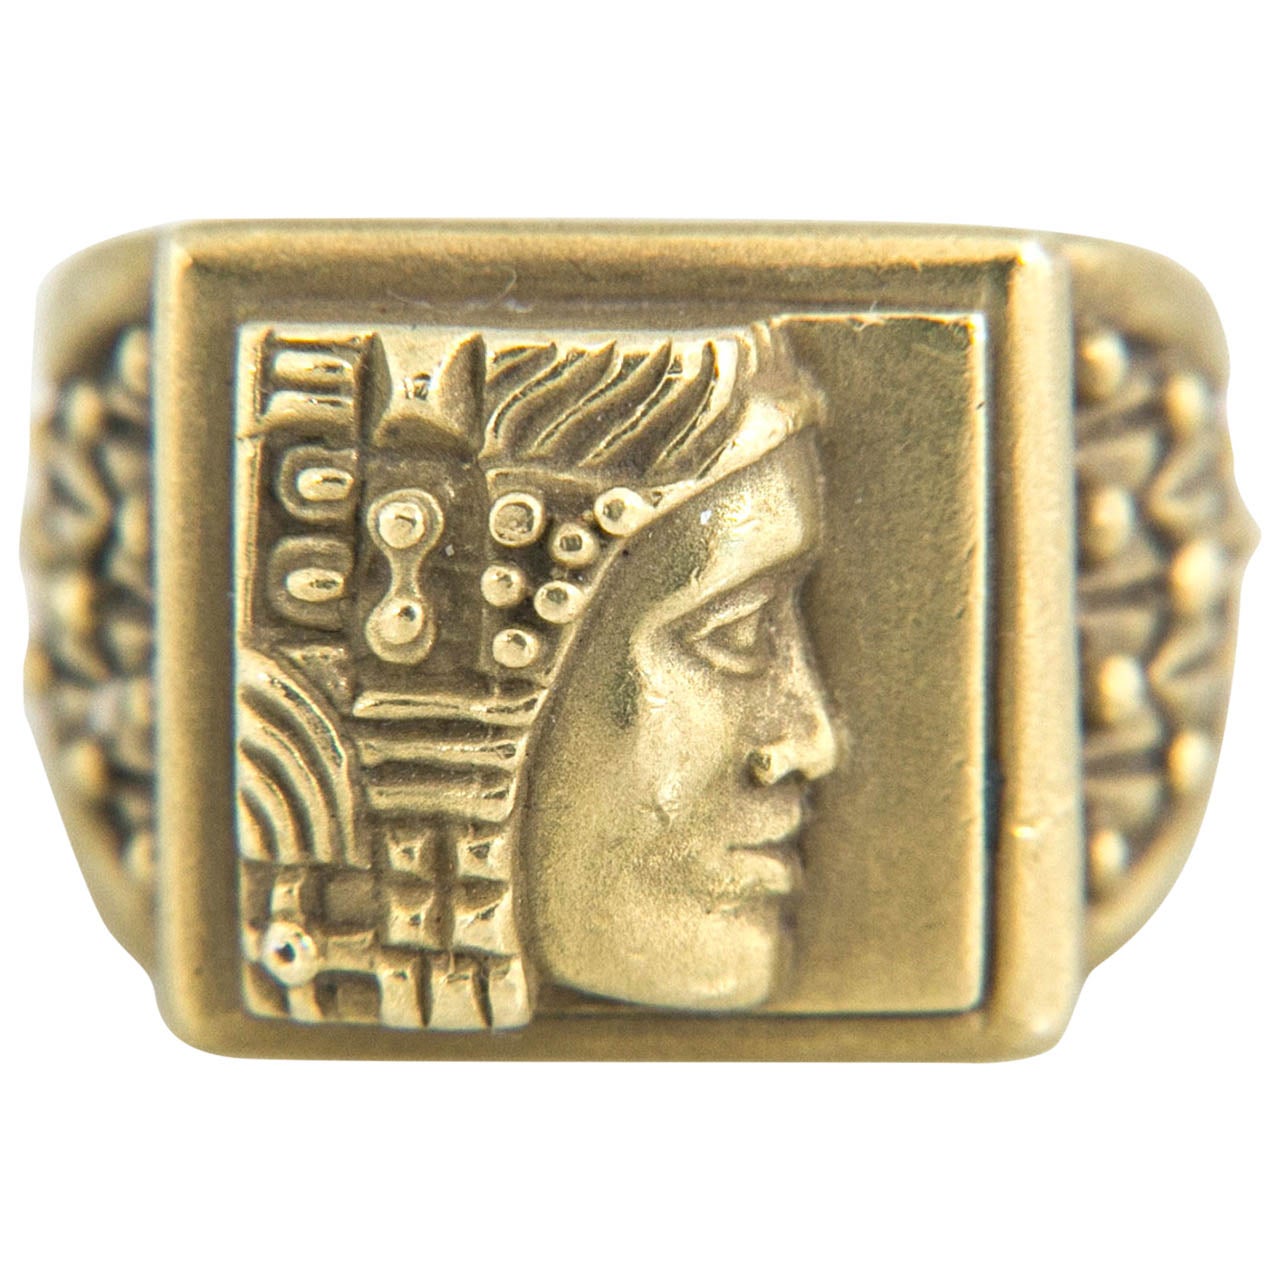 Barry Kieselstein-Cord "Woman of the World" Gold Signet Type Ring  For Sale